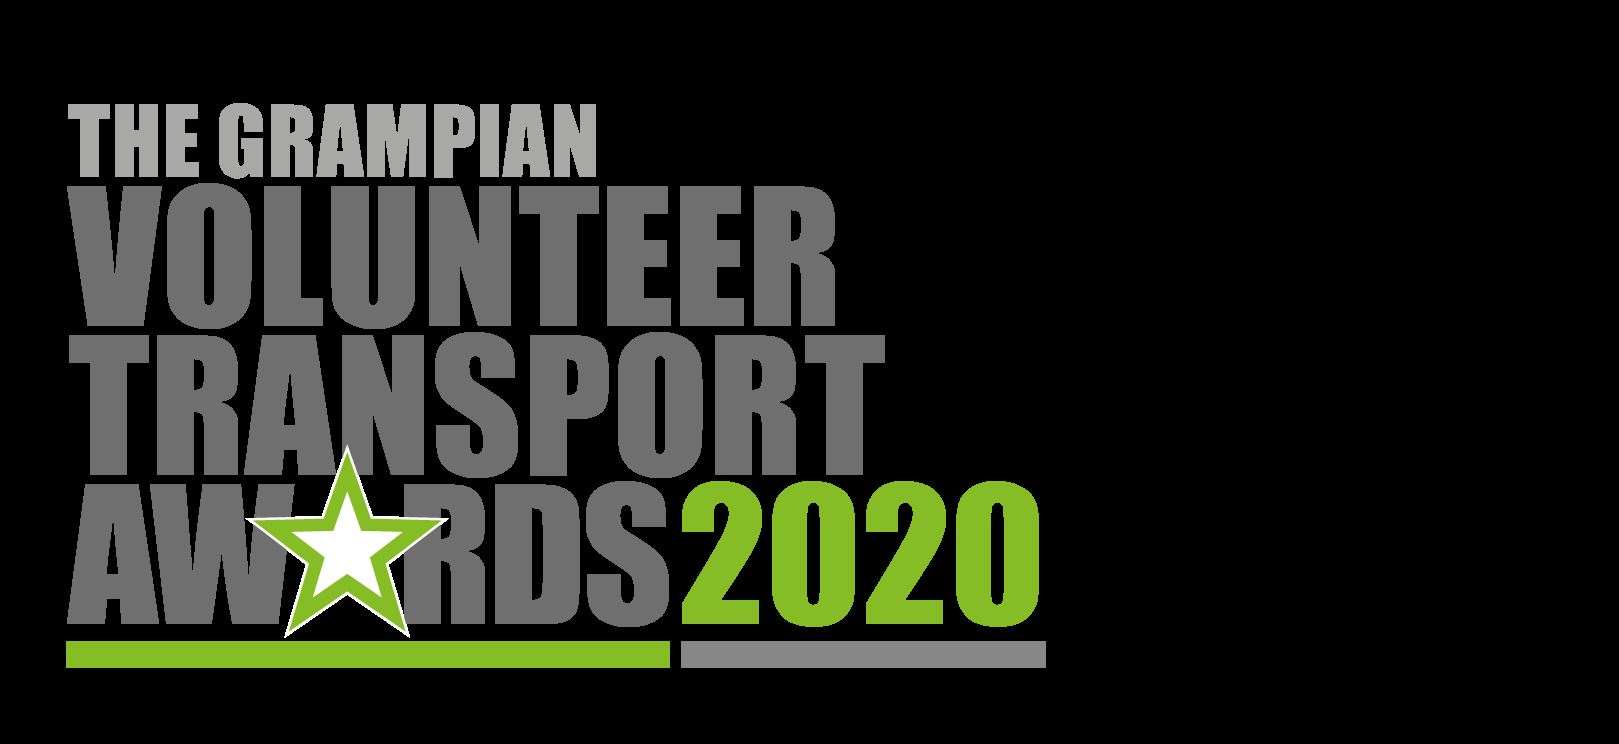 The Grampian Volunteer Transport Awards are accepting nominations.